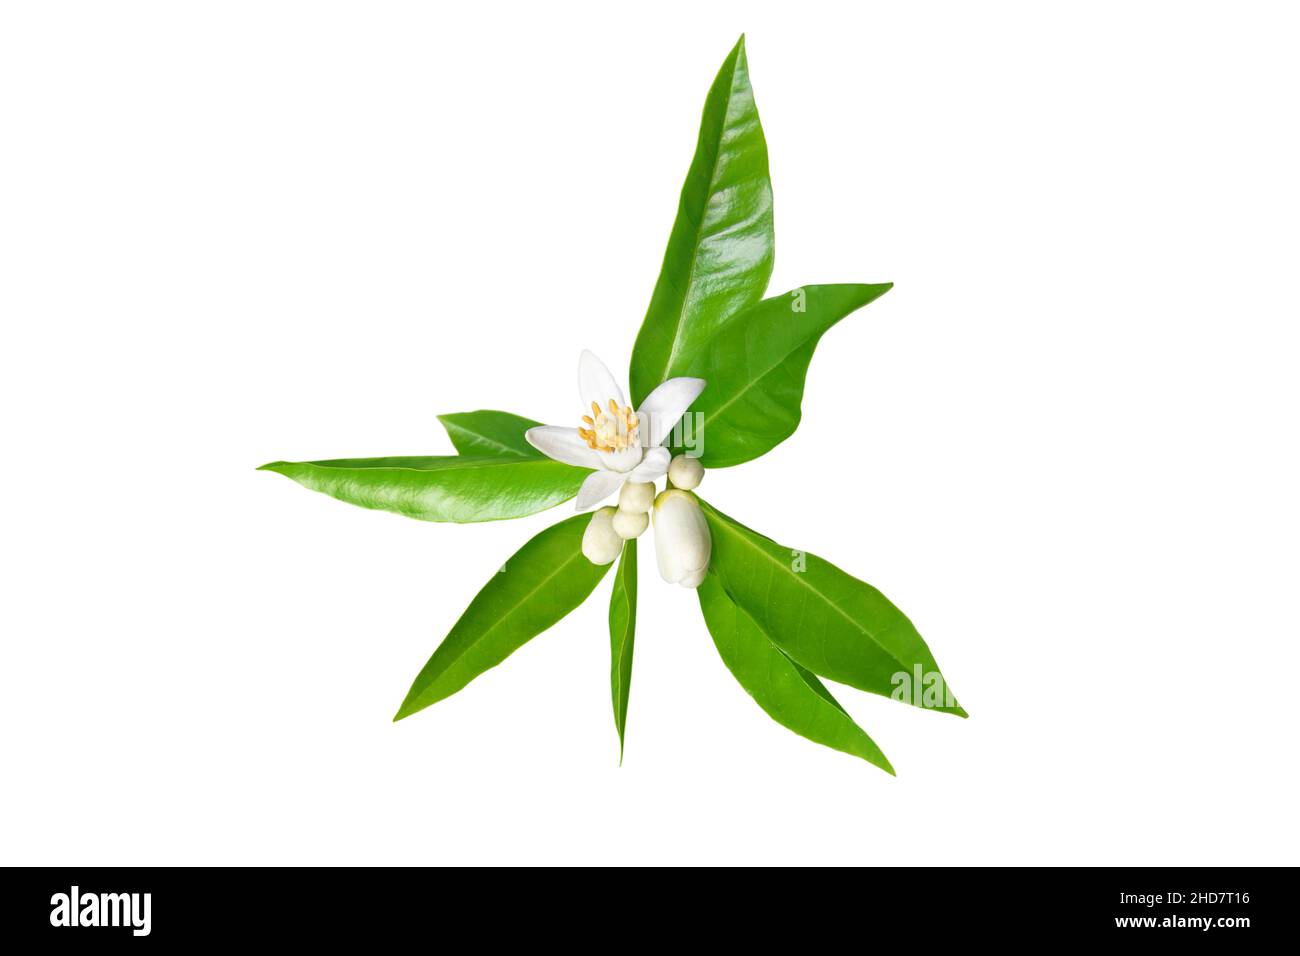 Citrus bloom. Orange tree branch with white flowers, buds and leaves isolated on white. Neroli blossom. Stock Photo